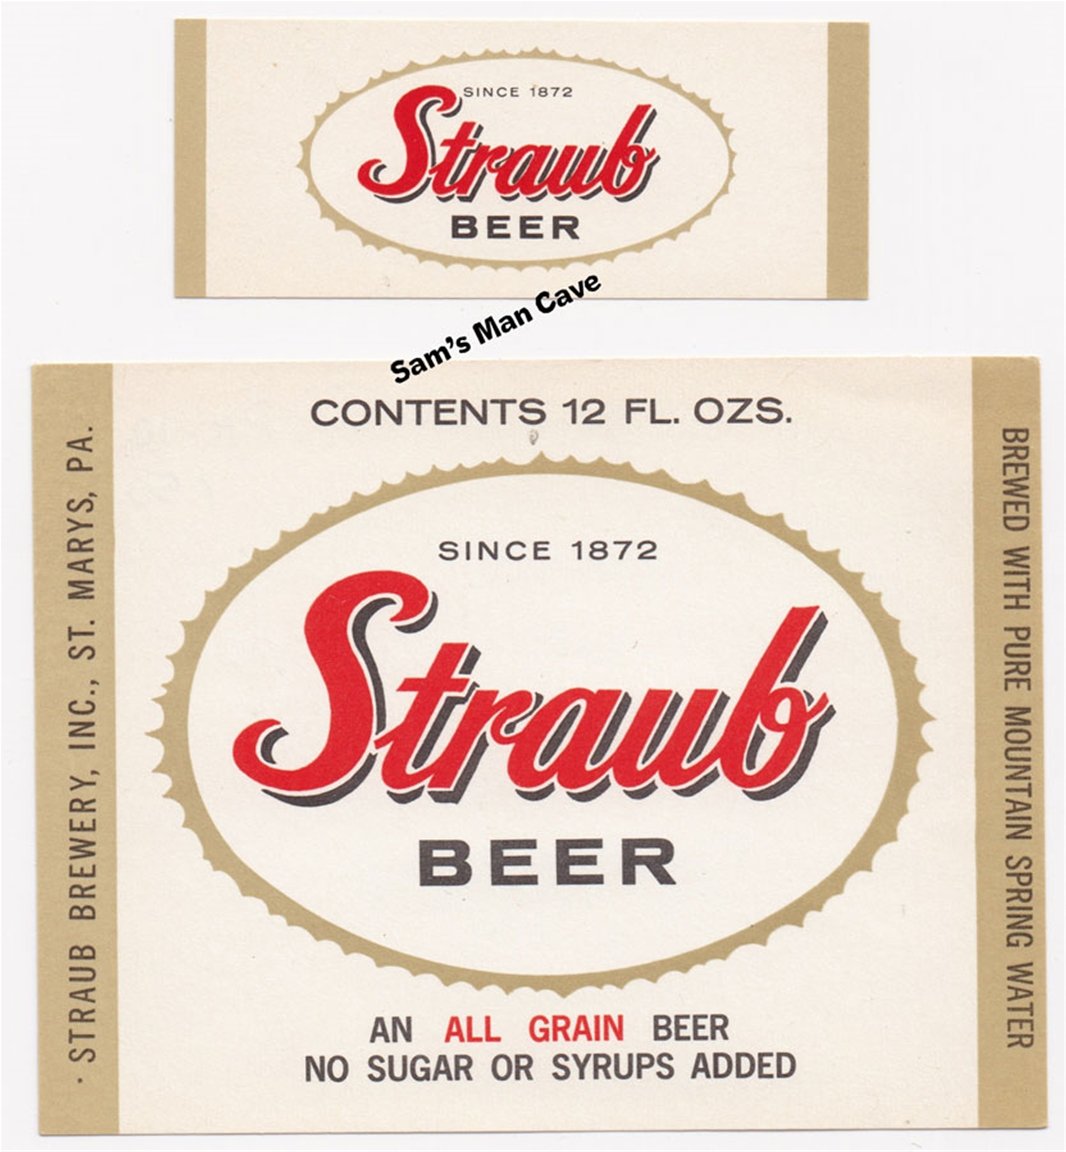 Straub Beer Label with neck